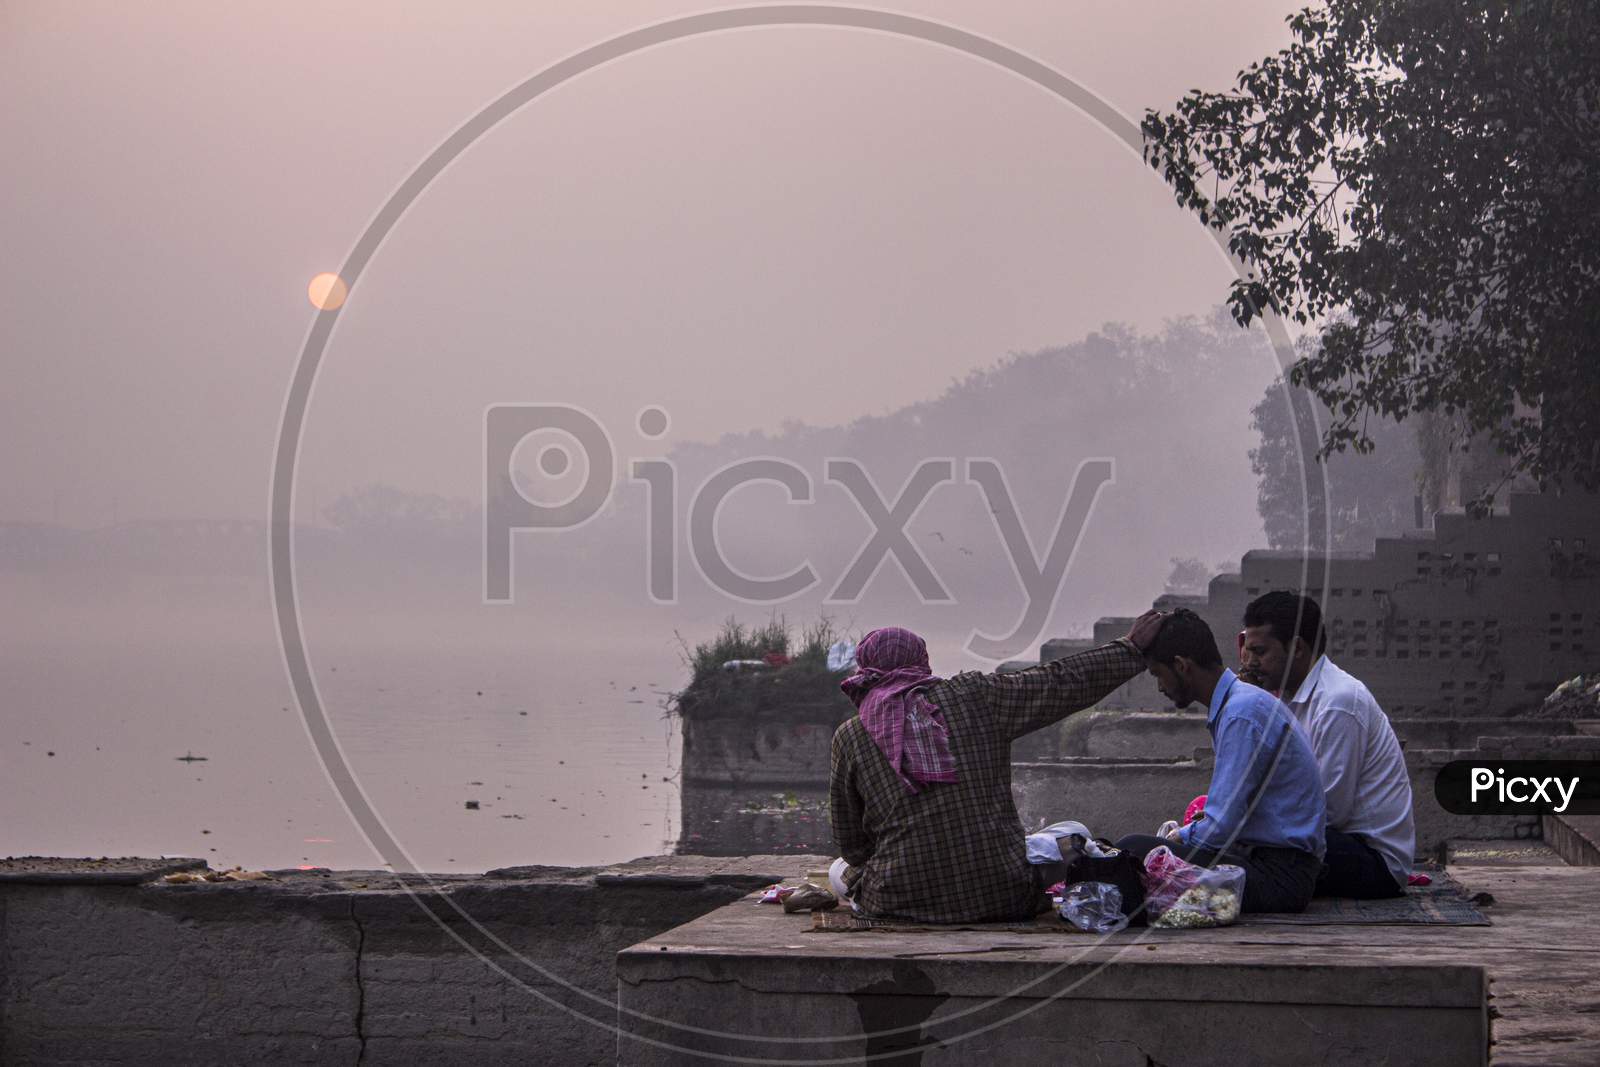 New Delhi, India - July 5 2018 : A Morning At Nigam Bodh Ghat Where People Are Parying To God Beside A River.